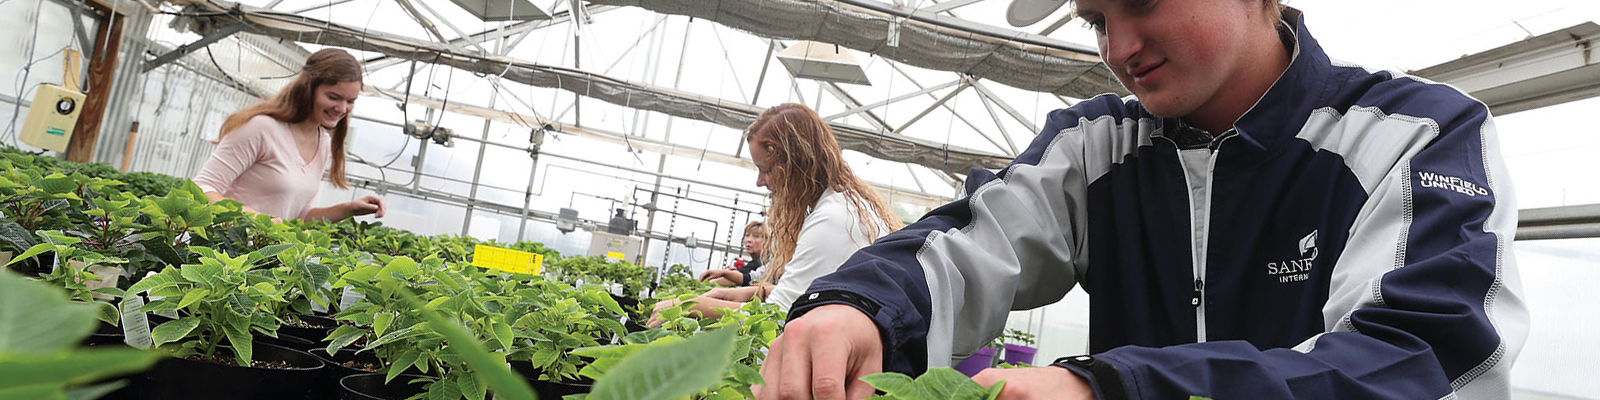 Student examining plant on greenhouse table